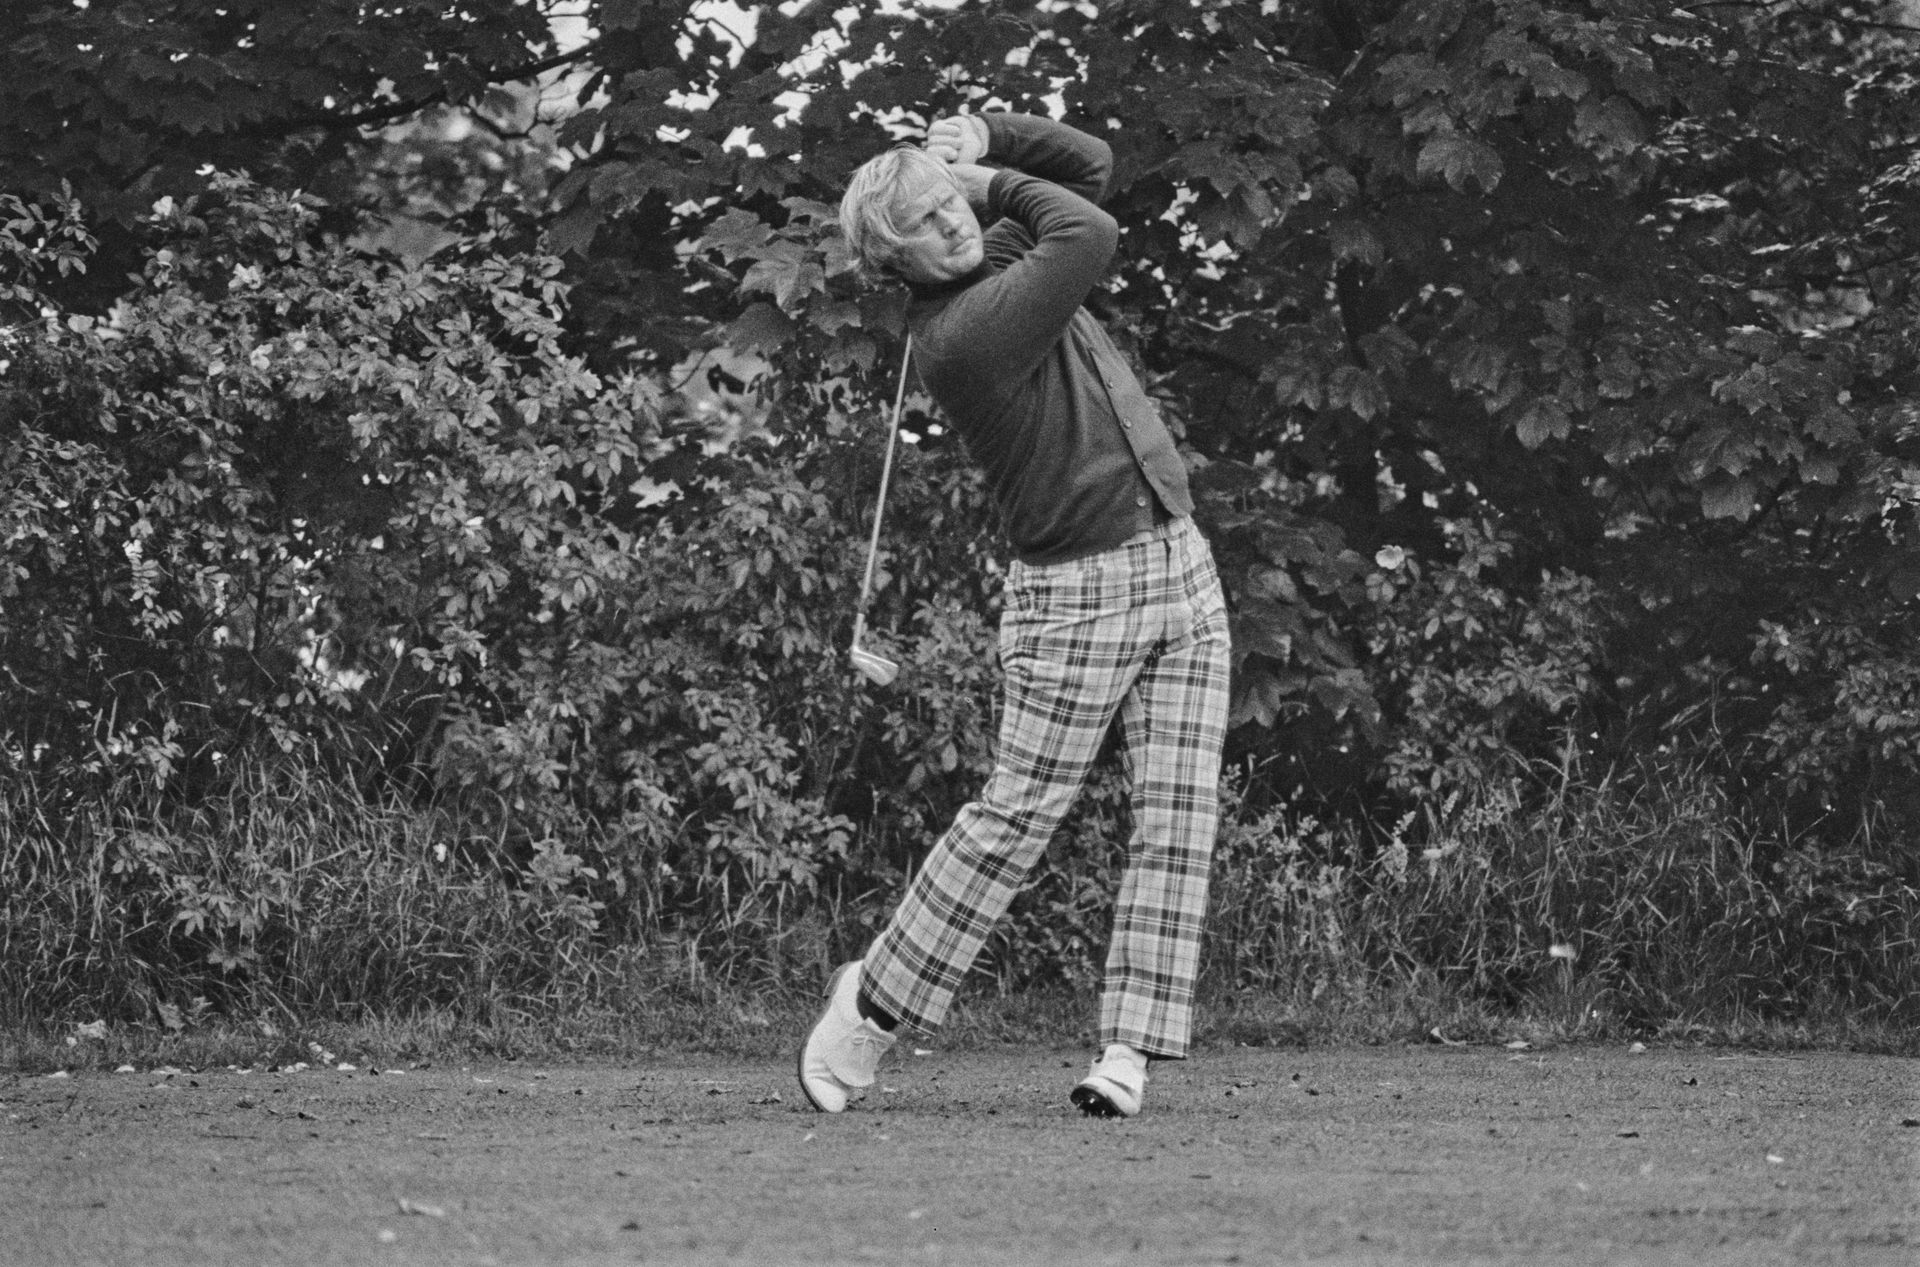 <p>                     With 18 Major Championship titles to his name, a quite ludicrous record, it’s probably fair to say the ‘Golden Bear’ didn’t really have any weaknesses. However, one of his greatest strengths was his ball-striking. Much like Woods, the sound of ball leaving the clubface must have been quite intimidating if you were playing alongside him. Even now, long after his retirement, a picture of Nicklaus in the finish position is quite the sight.                   </p>